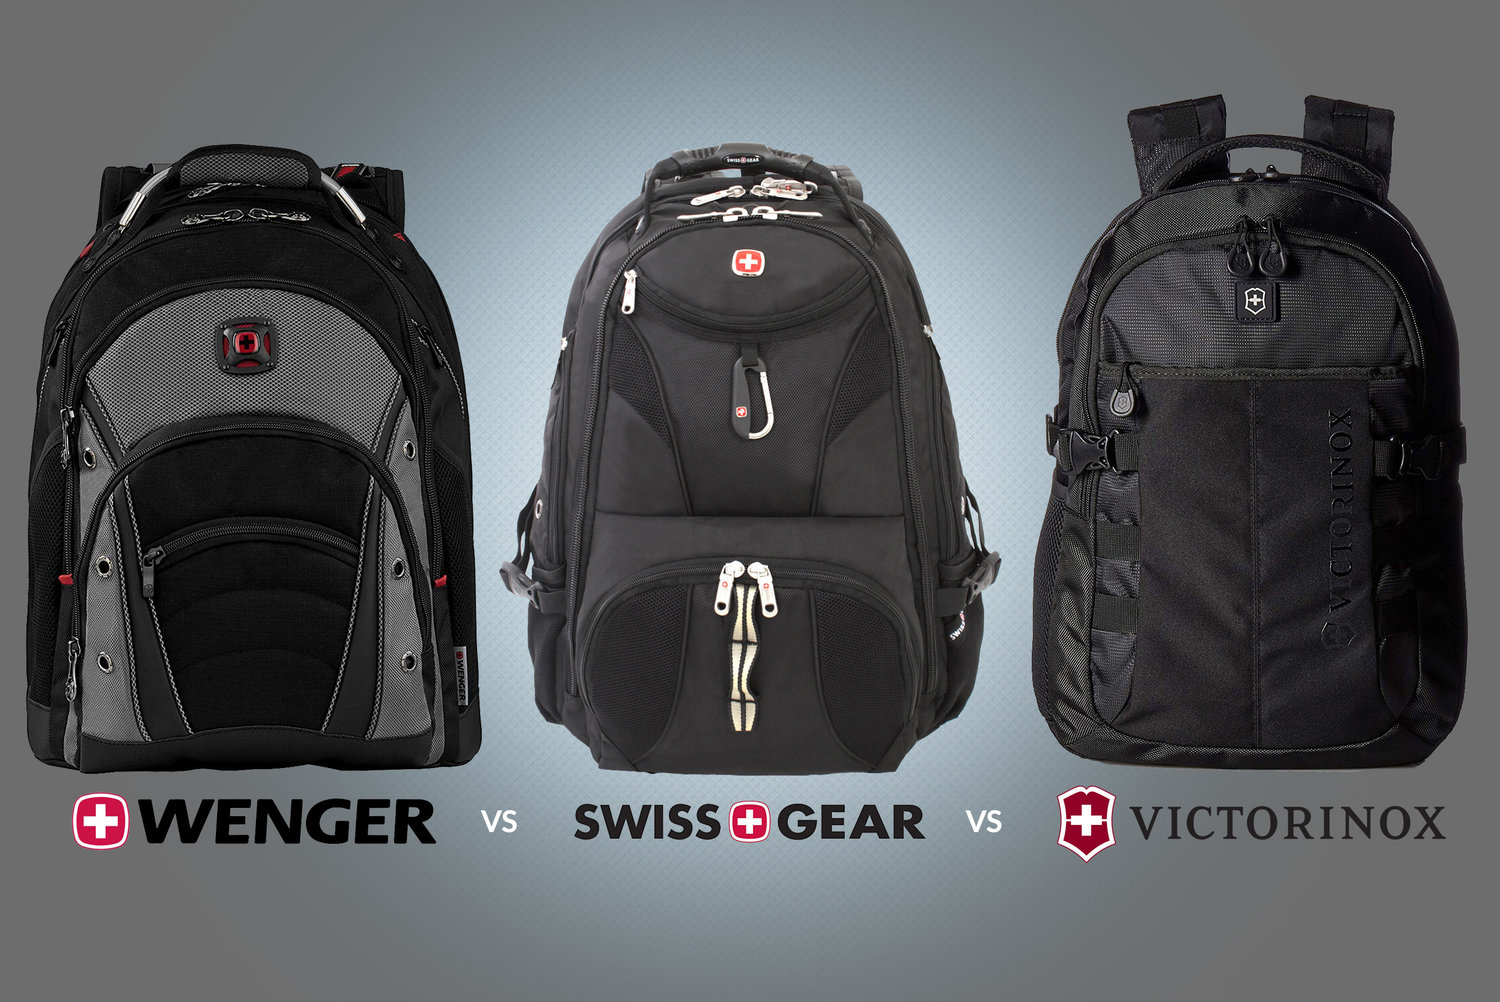 Wenger vs Victorinox vs Swiss Gear - What's the difference? | Backpackies